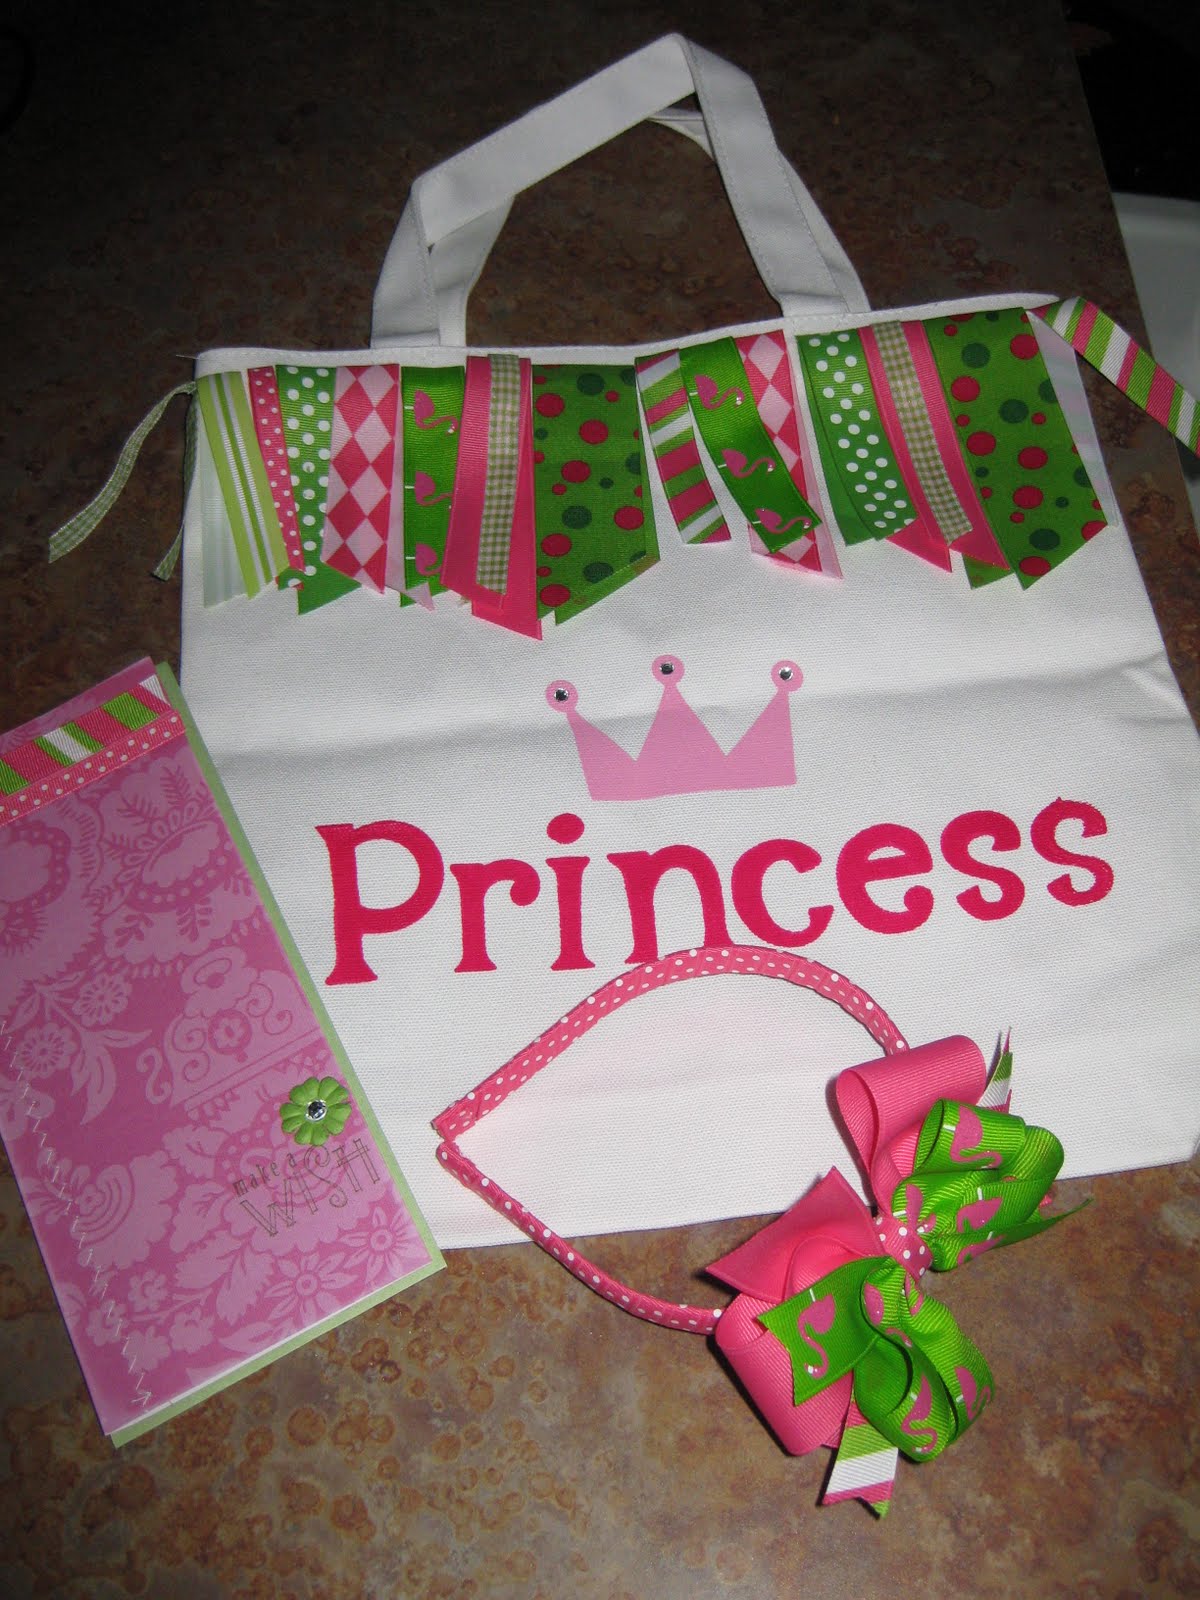 Little Lady Designs: More ideas!!! Ribbon Bags & Bow Holders!